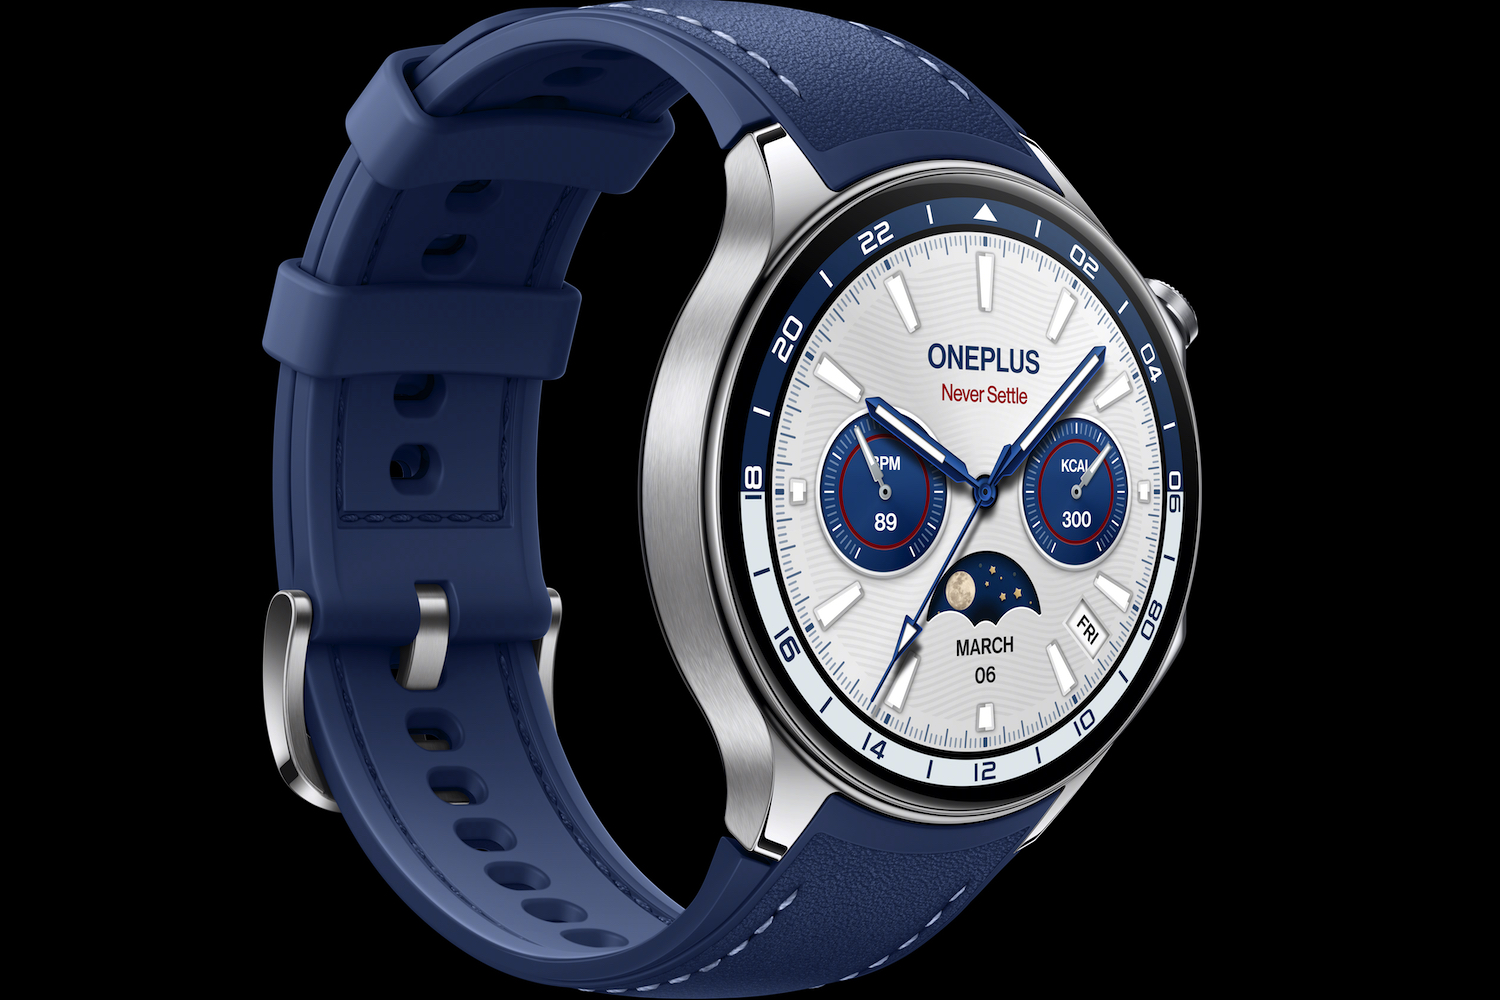 A render of the OnePlus Watch 2 Nordic Blue edition.